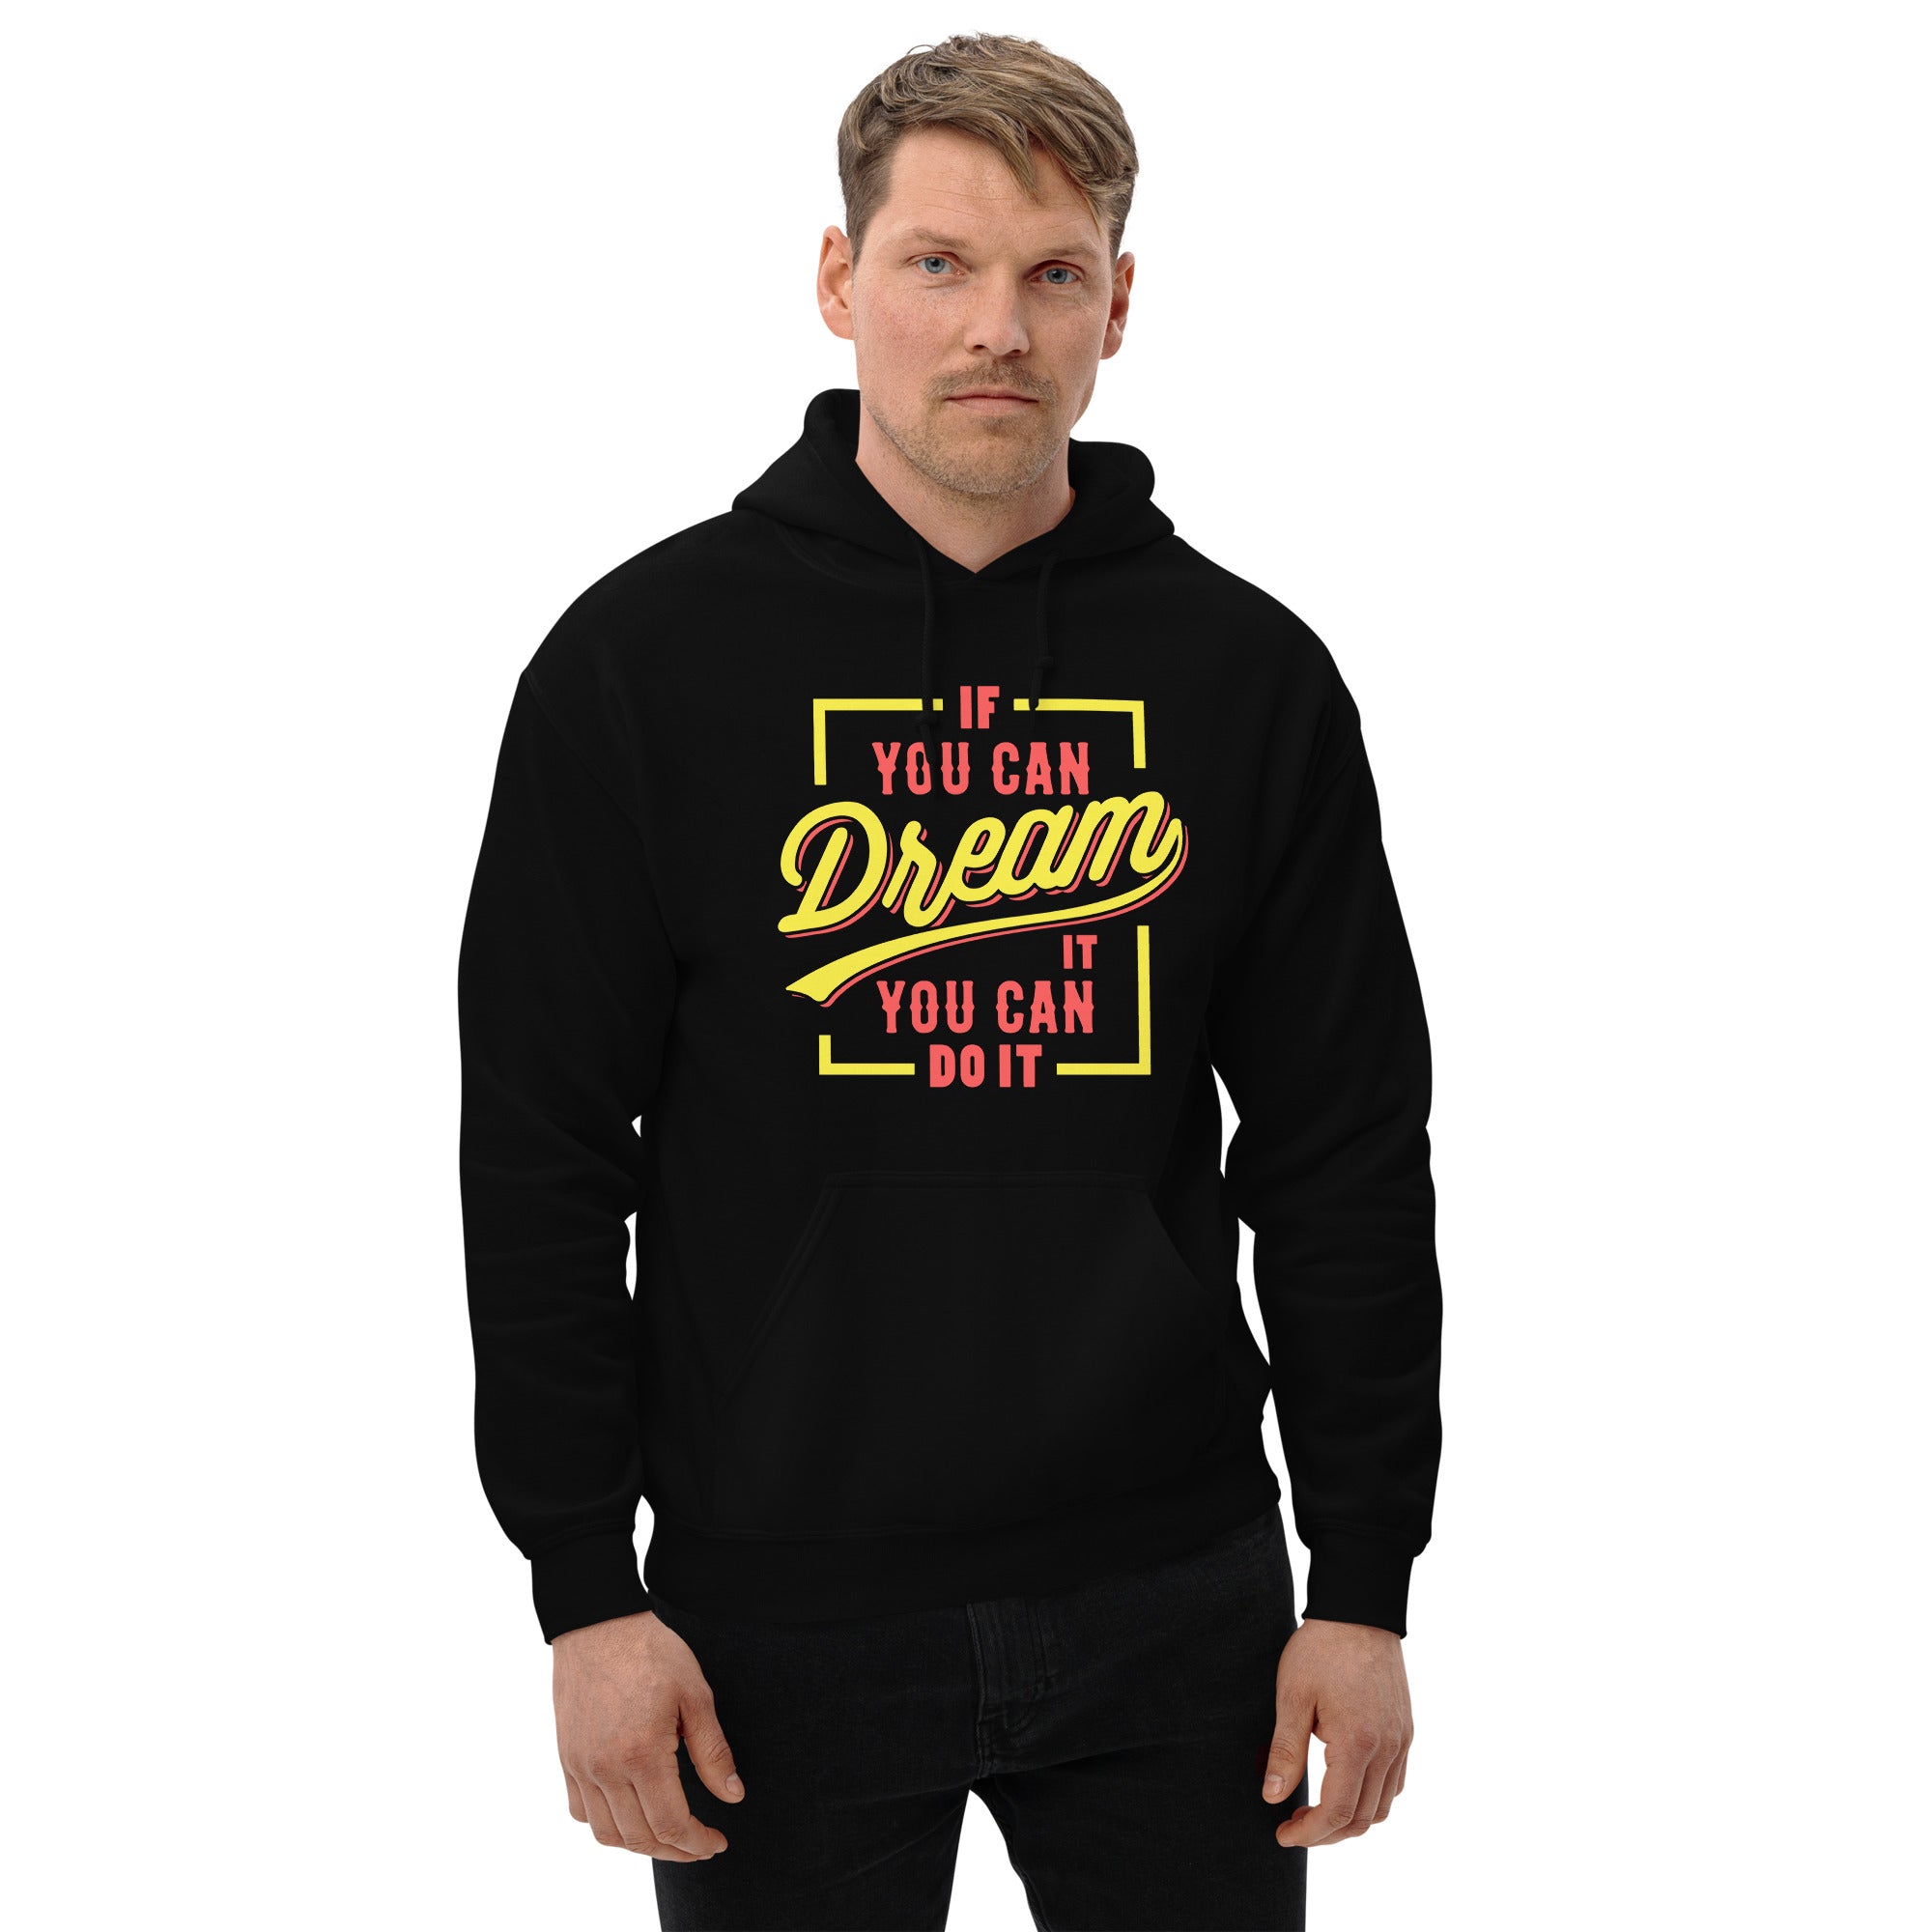 If You Can Dream It, You Can Do It - Unisex Hoodie